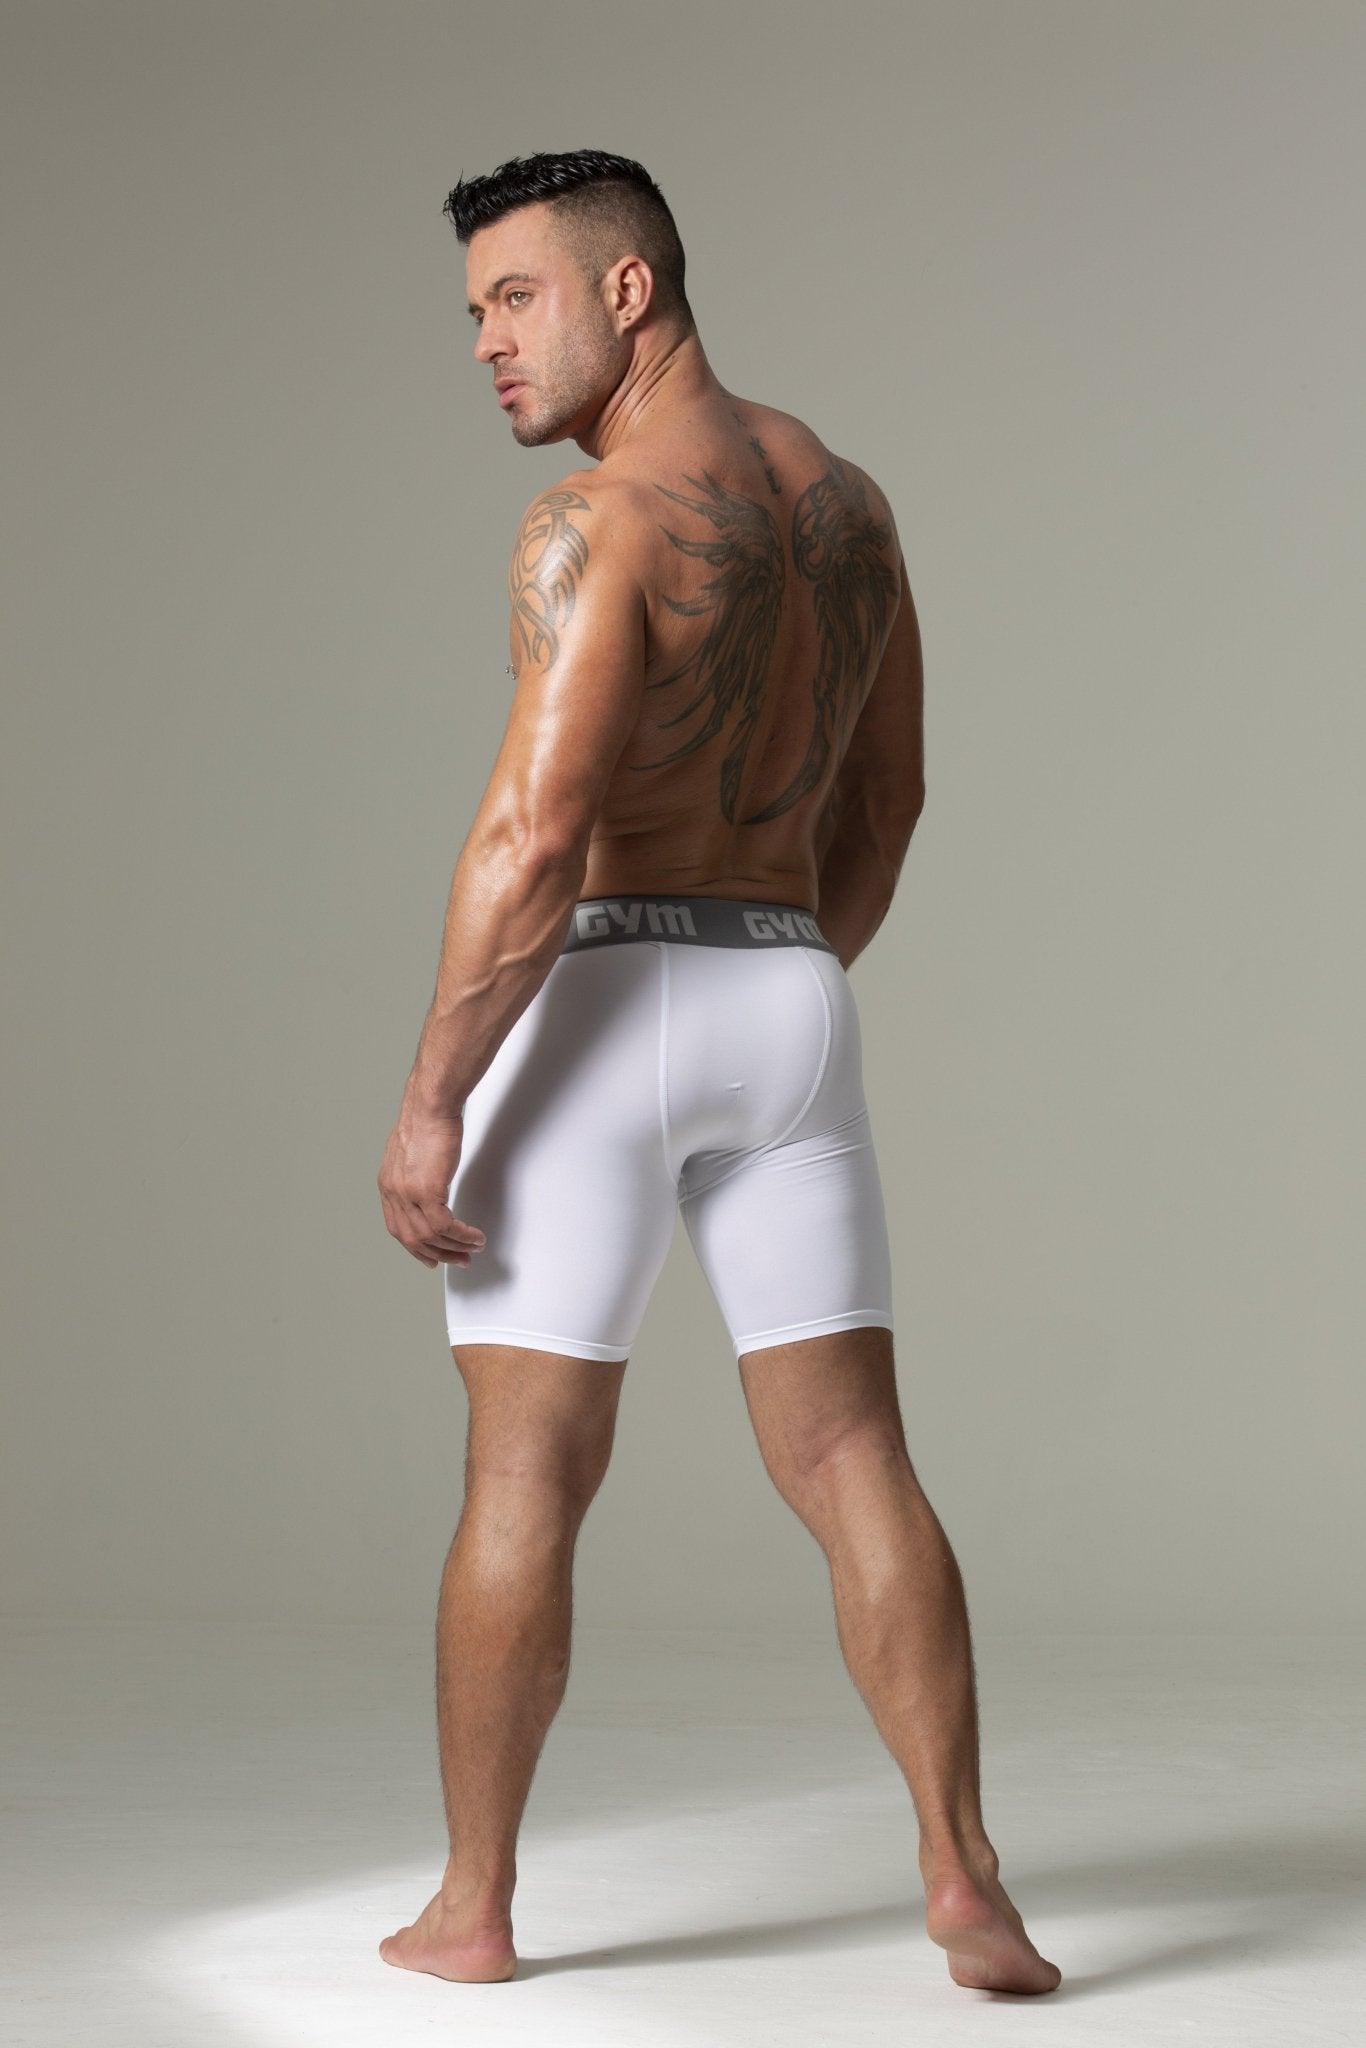 GYM Compression Short with Hard Cup Included - Jockstraps.com